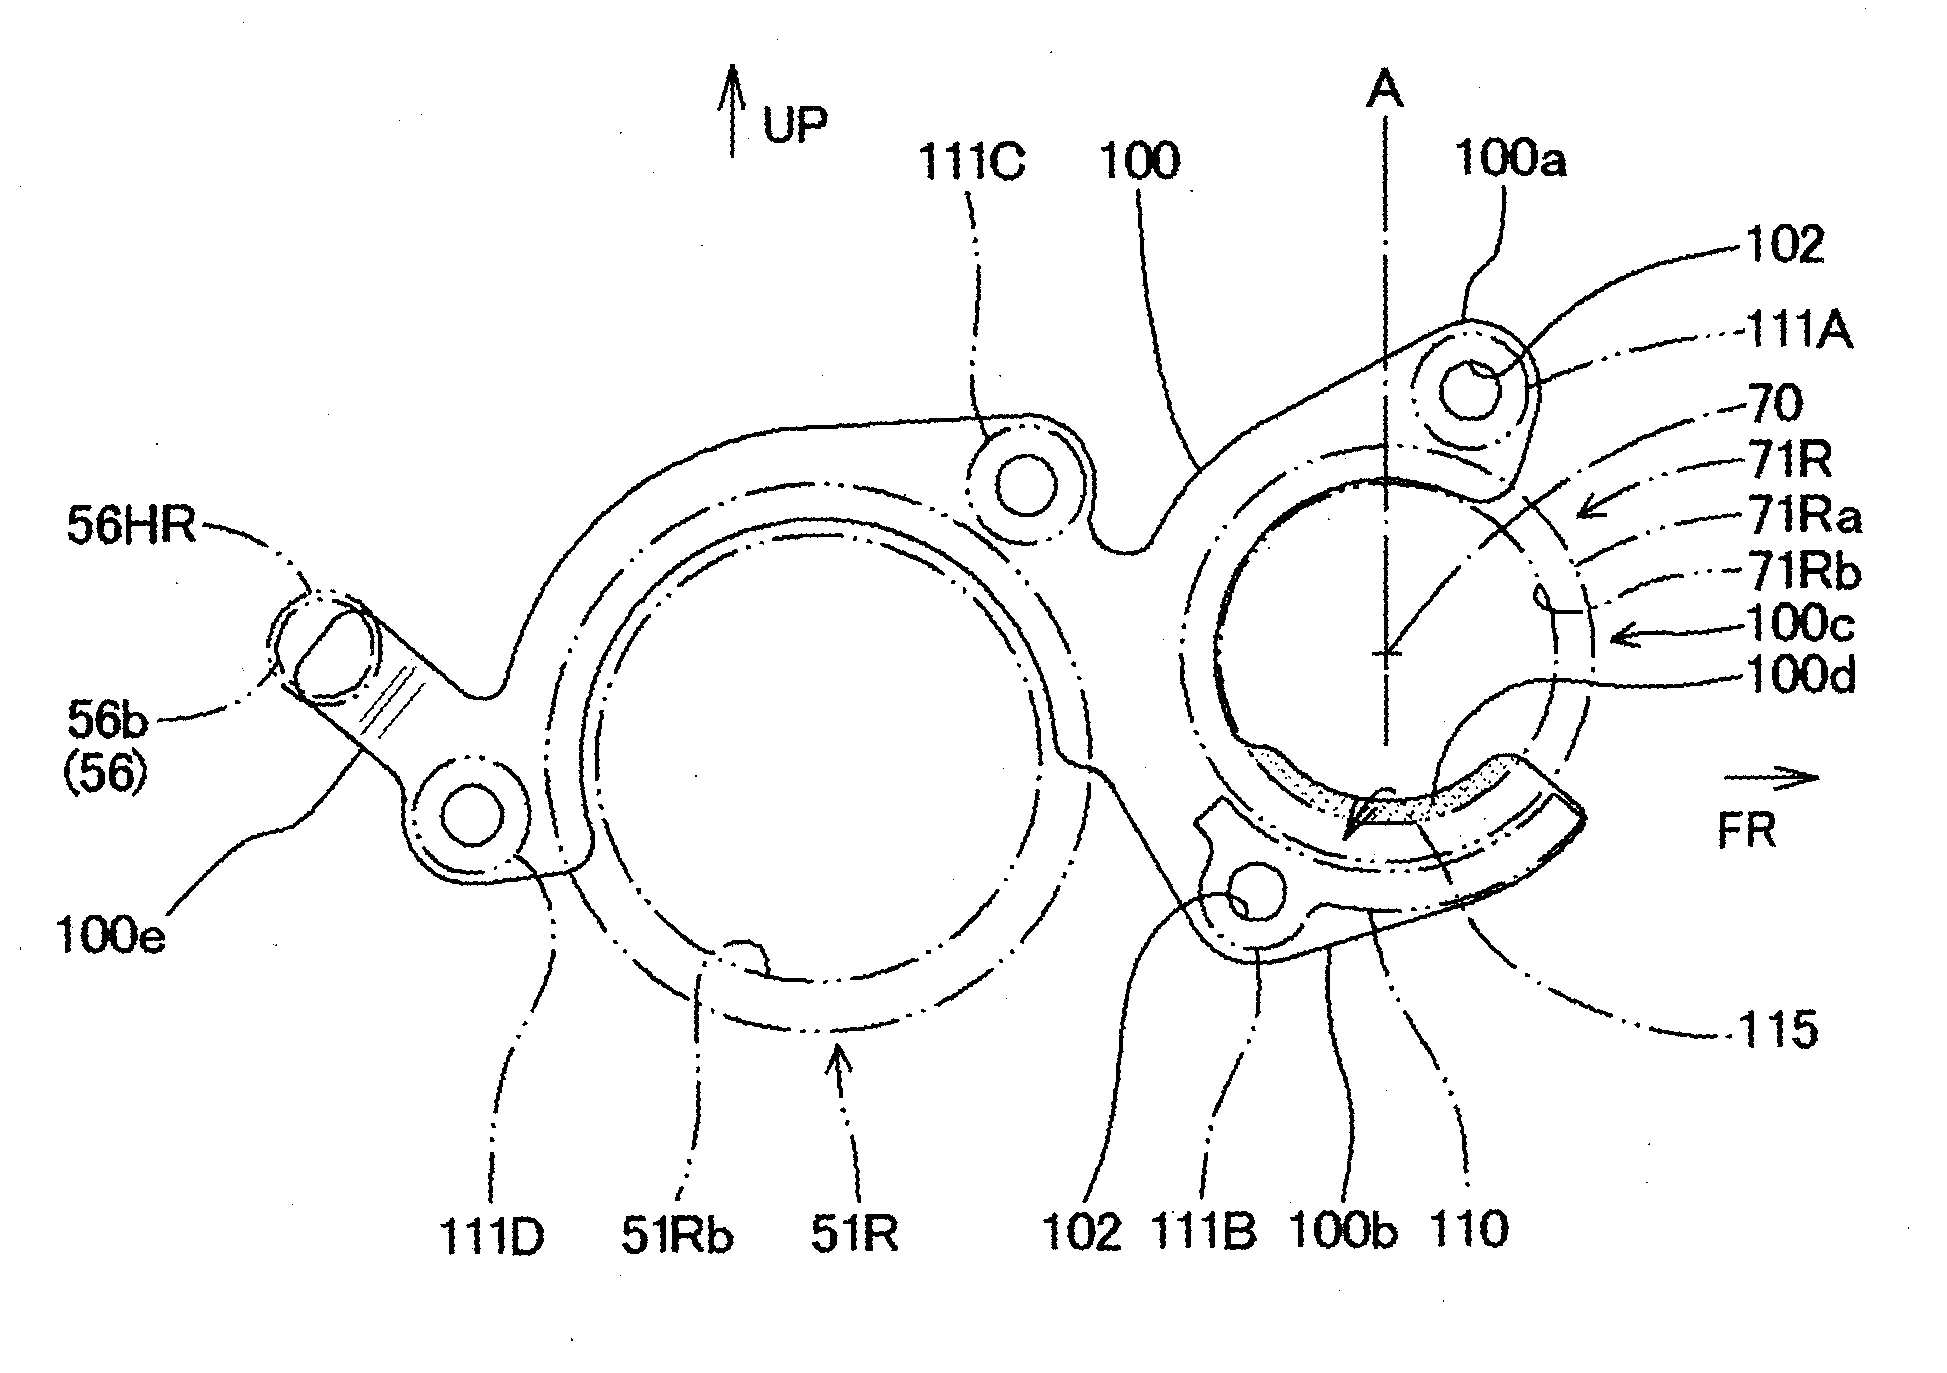 Lubrication structure for bearing section